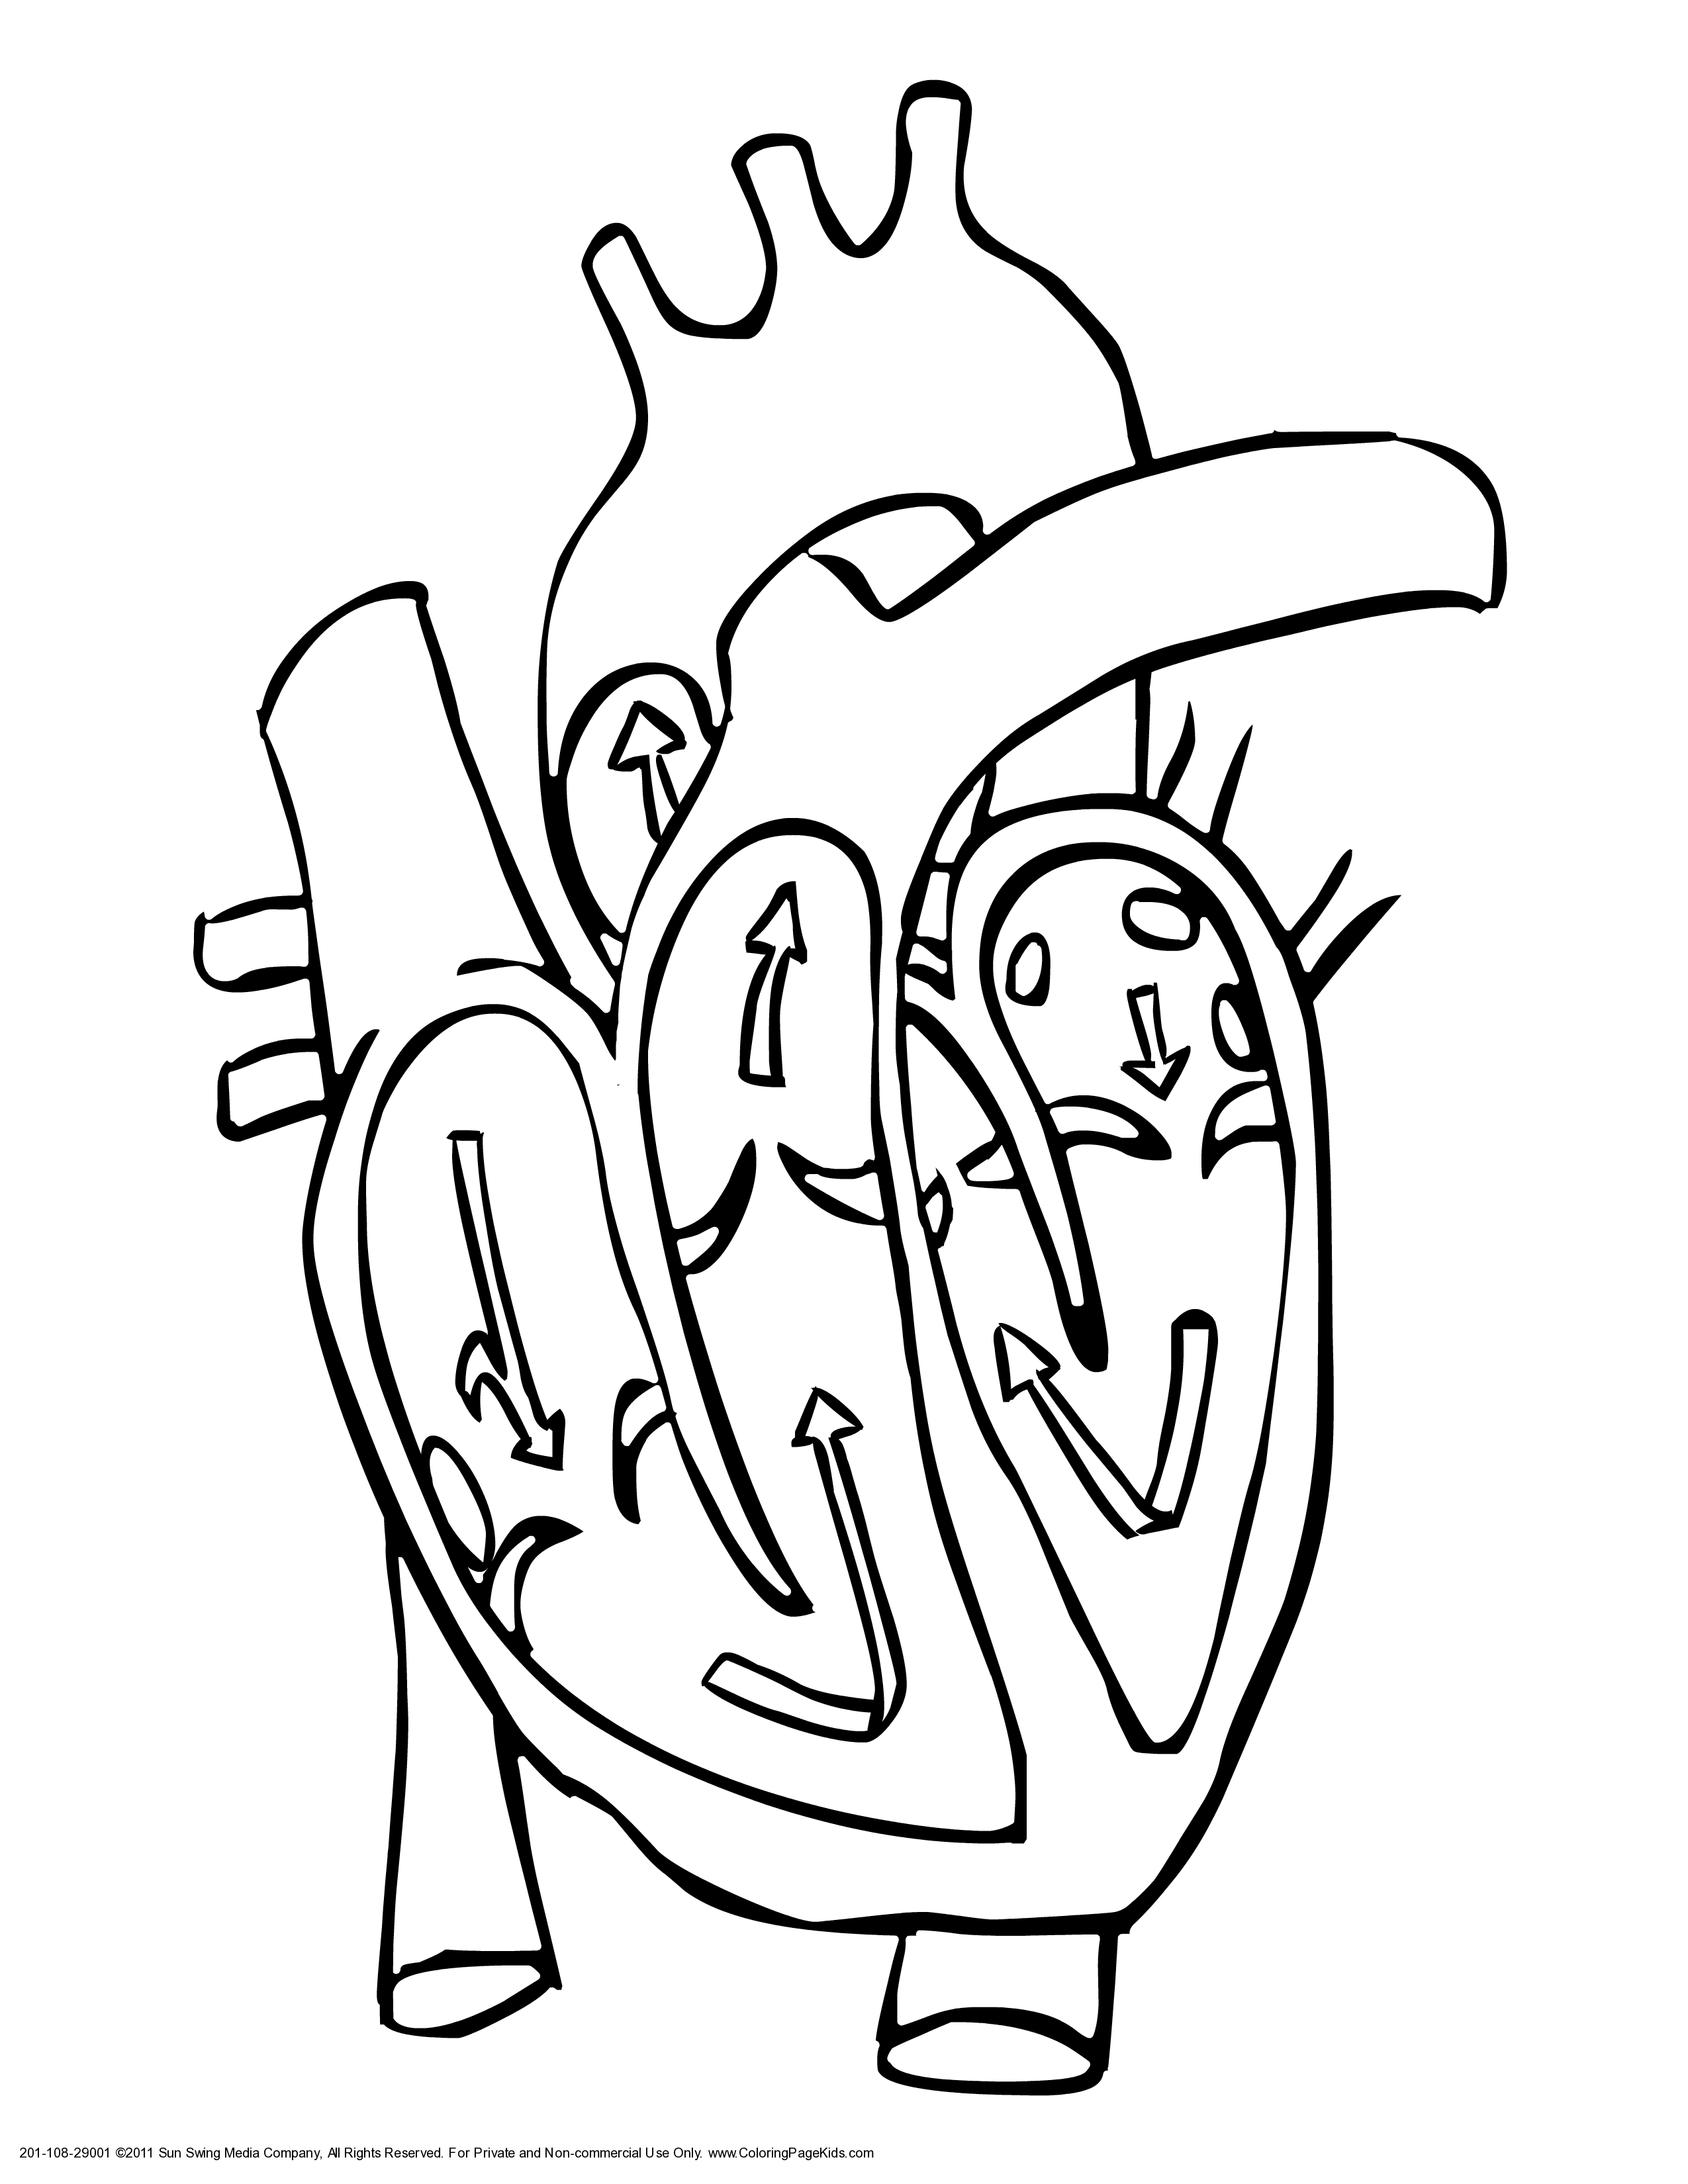 Blank Diagram Of The Heart - ClipArt Best